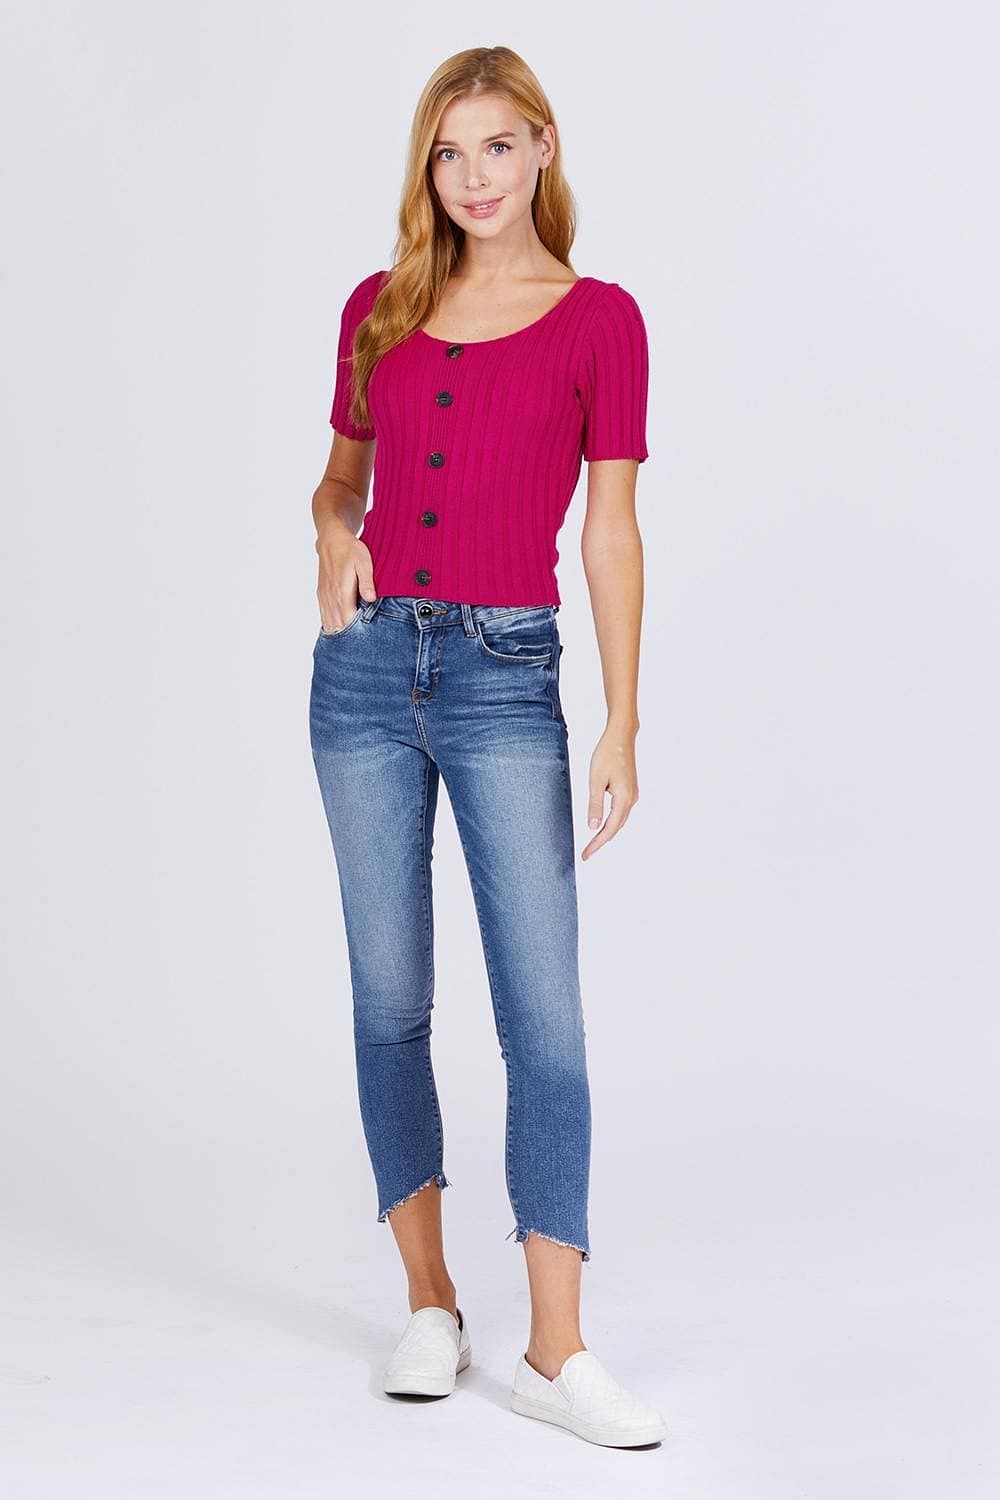 Fuchsia Short Sleeve Rib Knitted Sweater - Shopping Therapy L Top